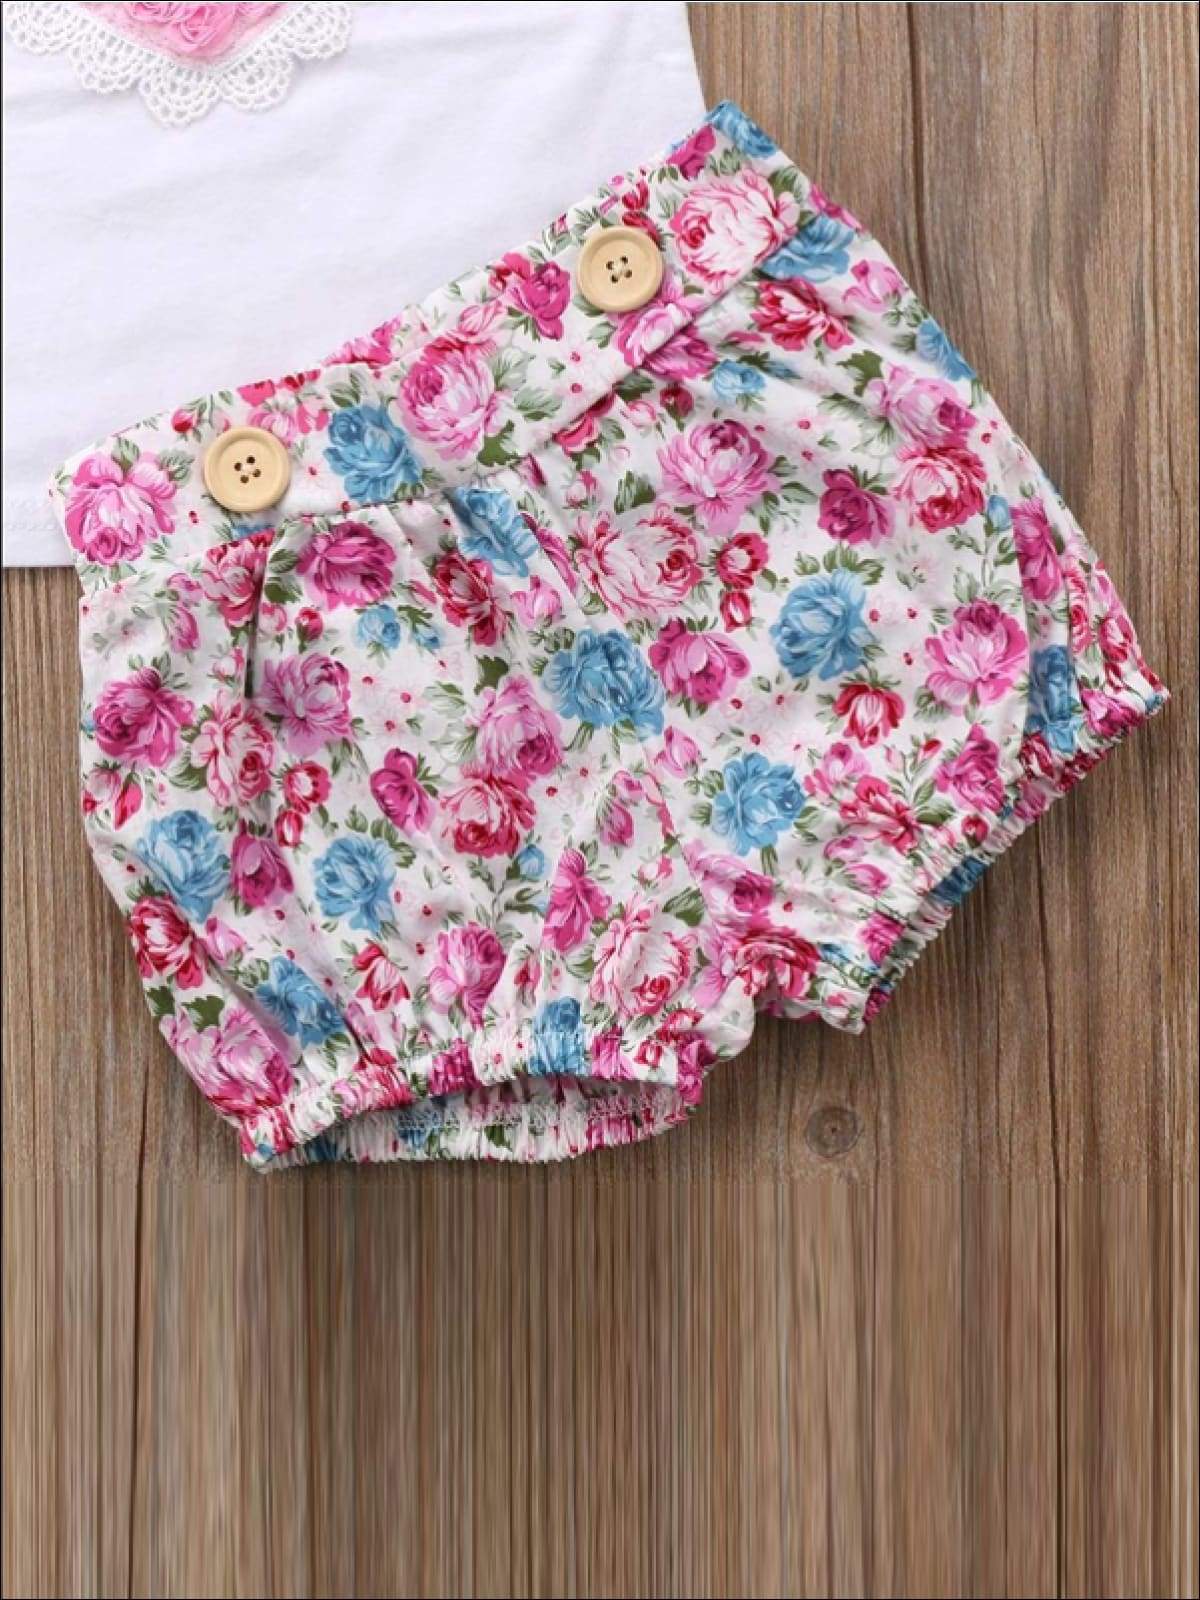 Big Sister & Little Sister Pink Heart Floral Print 2PC Set with Matching Hair Bow - Casual Spring Set